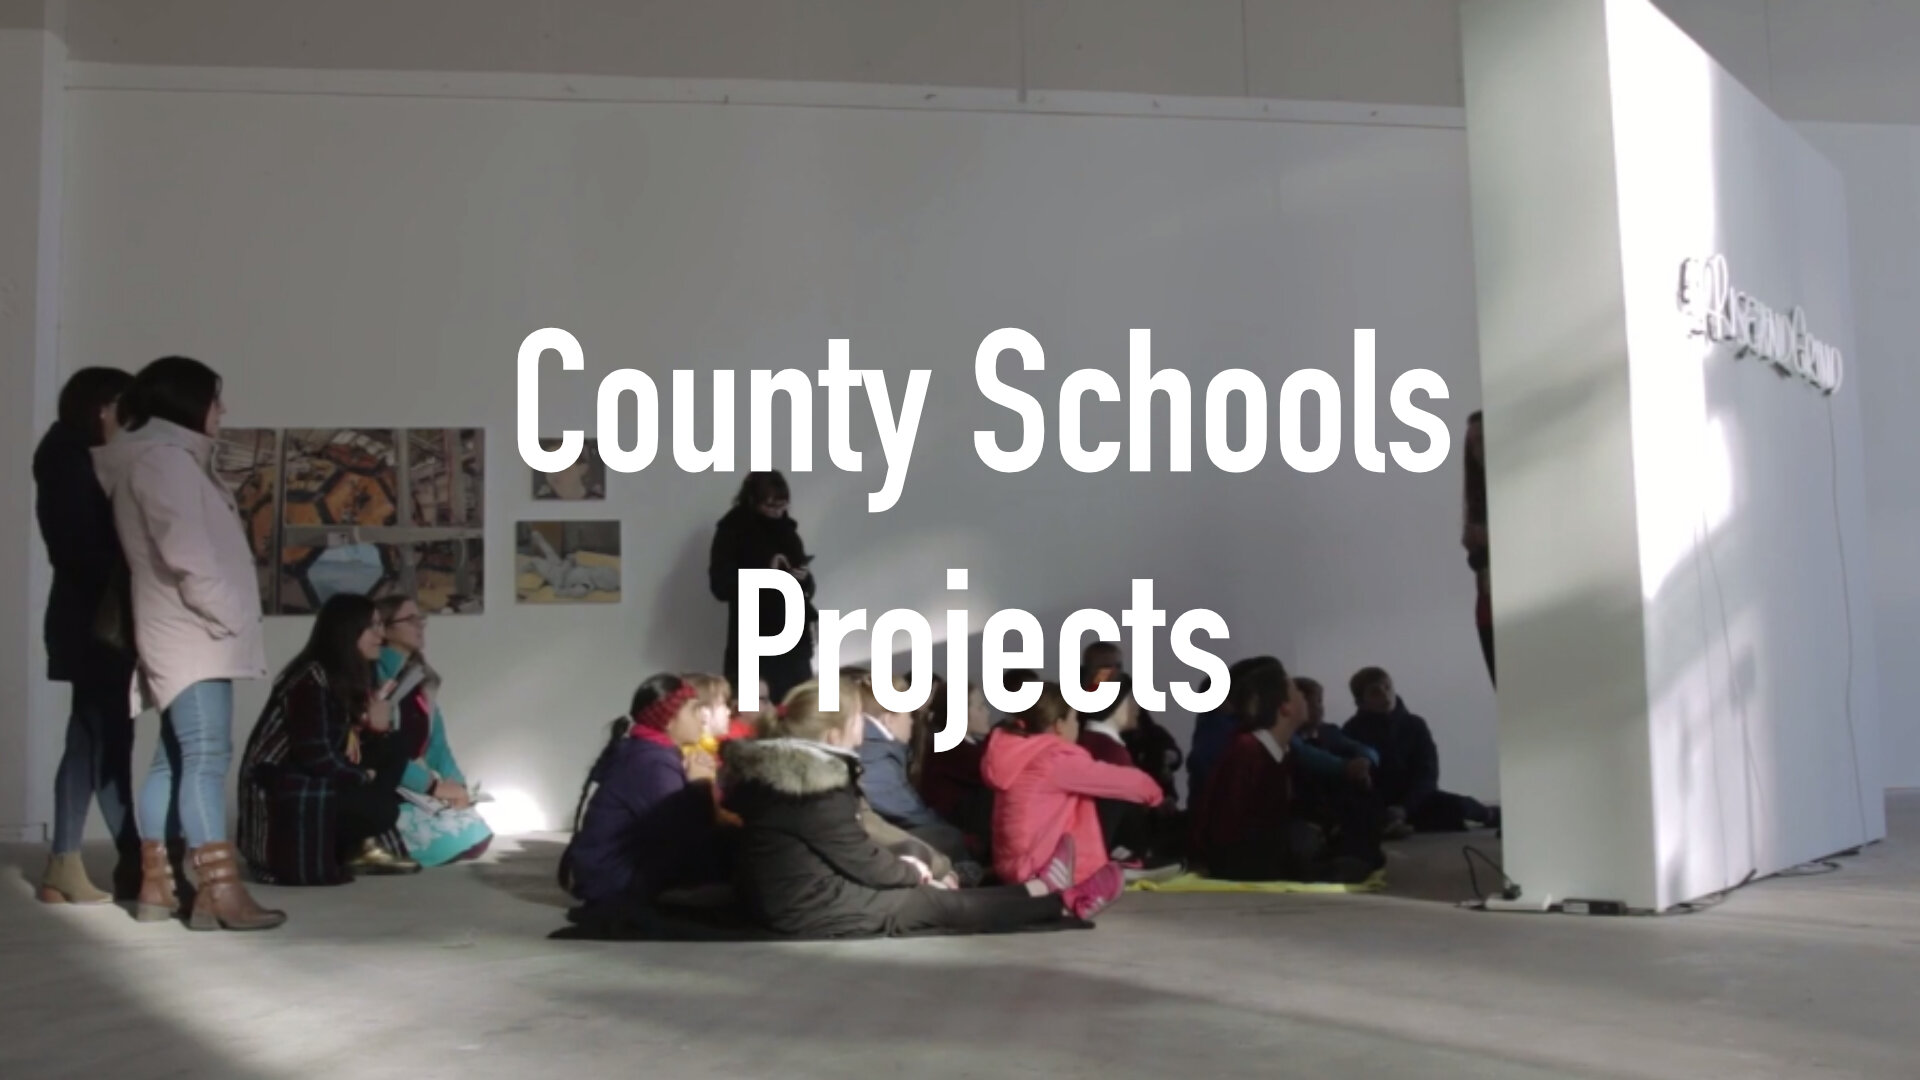 county schools projects image banner 2.jpg